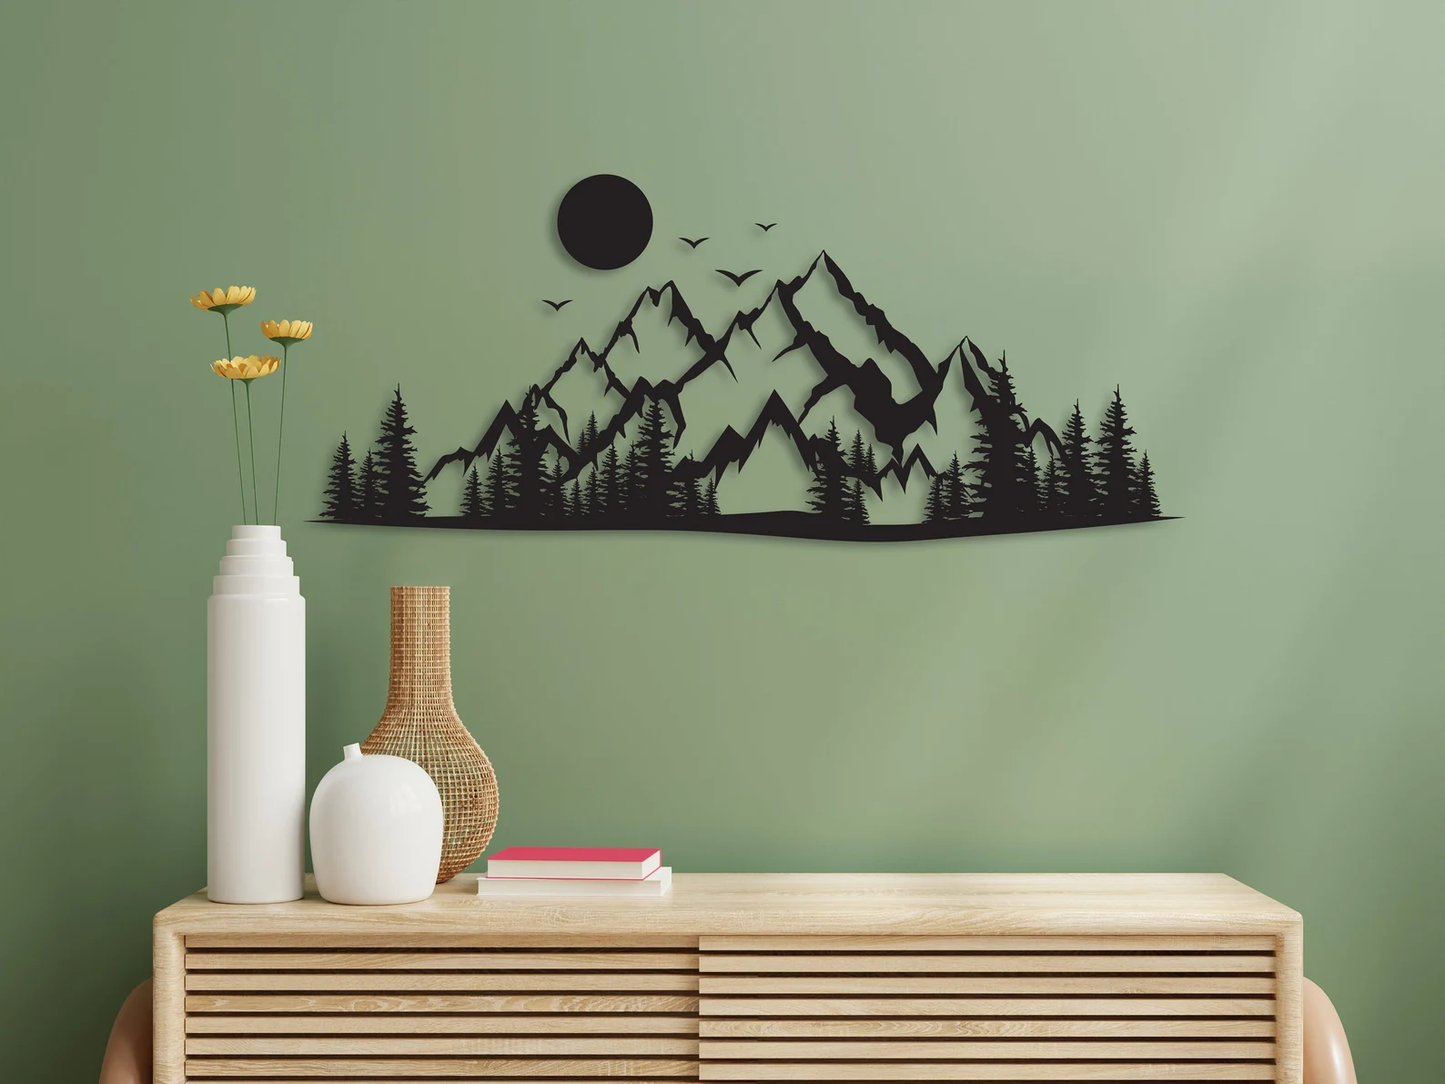 Mountain Metal Wall Art Decor, Mountain Range View, Nature and Forest Decorations, Home Decor, Metal Wall Hanging, Housewarming Gift Unique